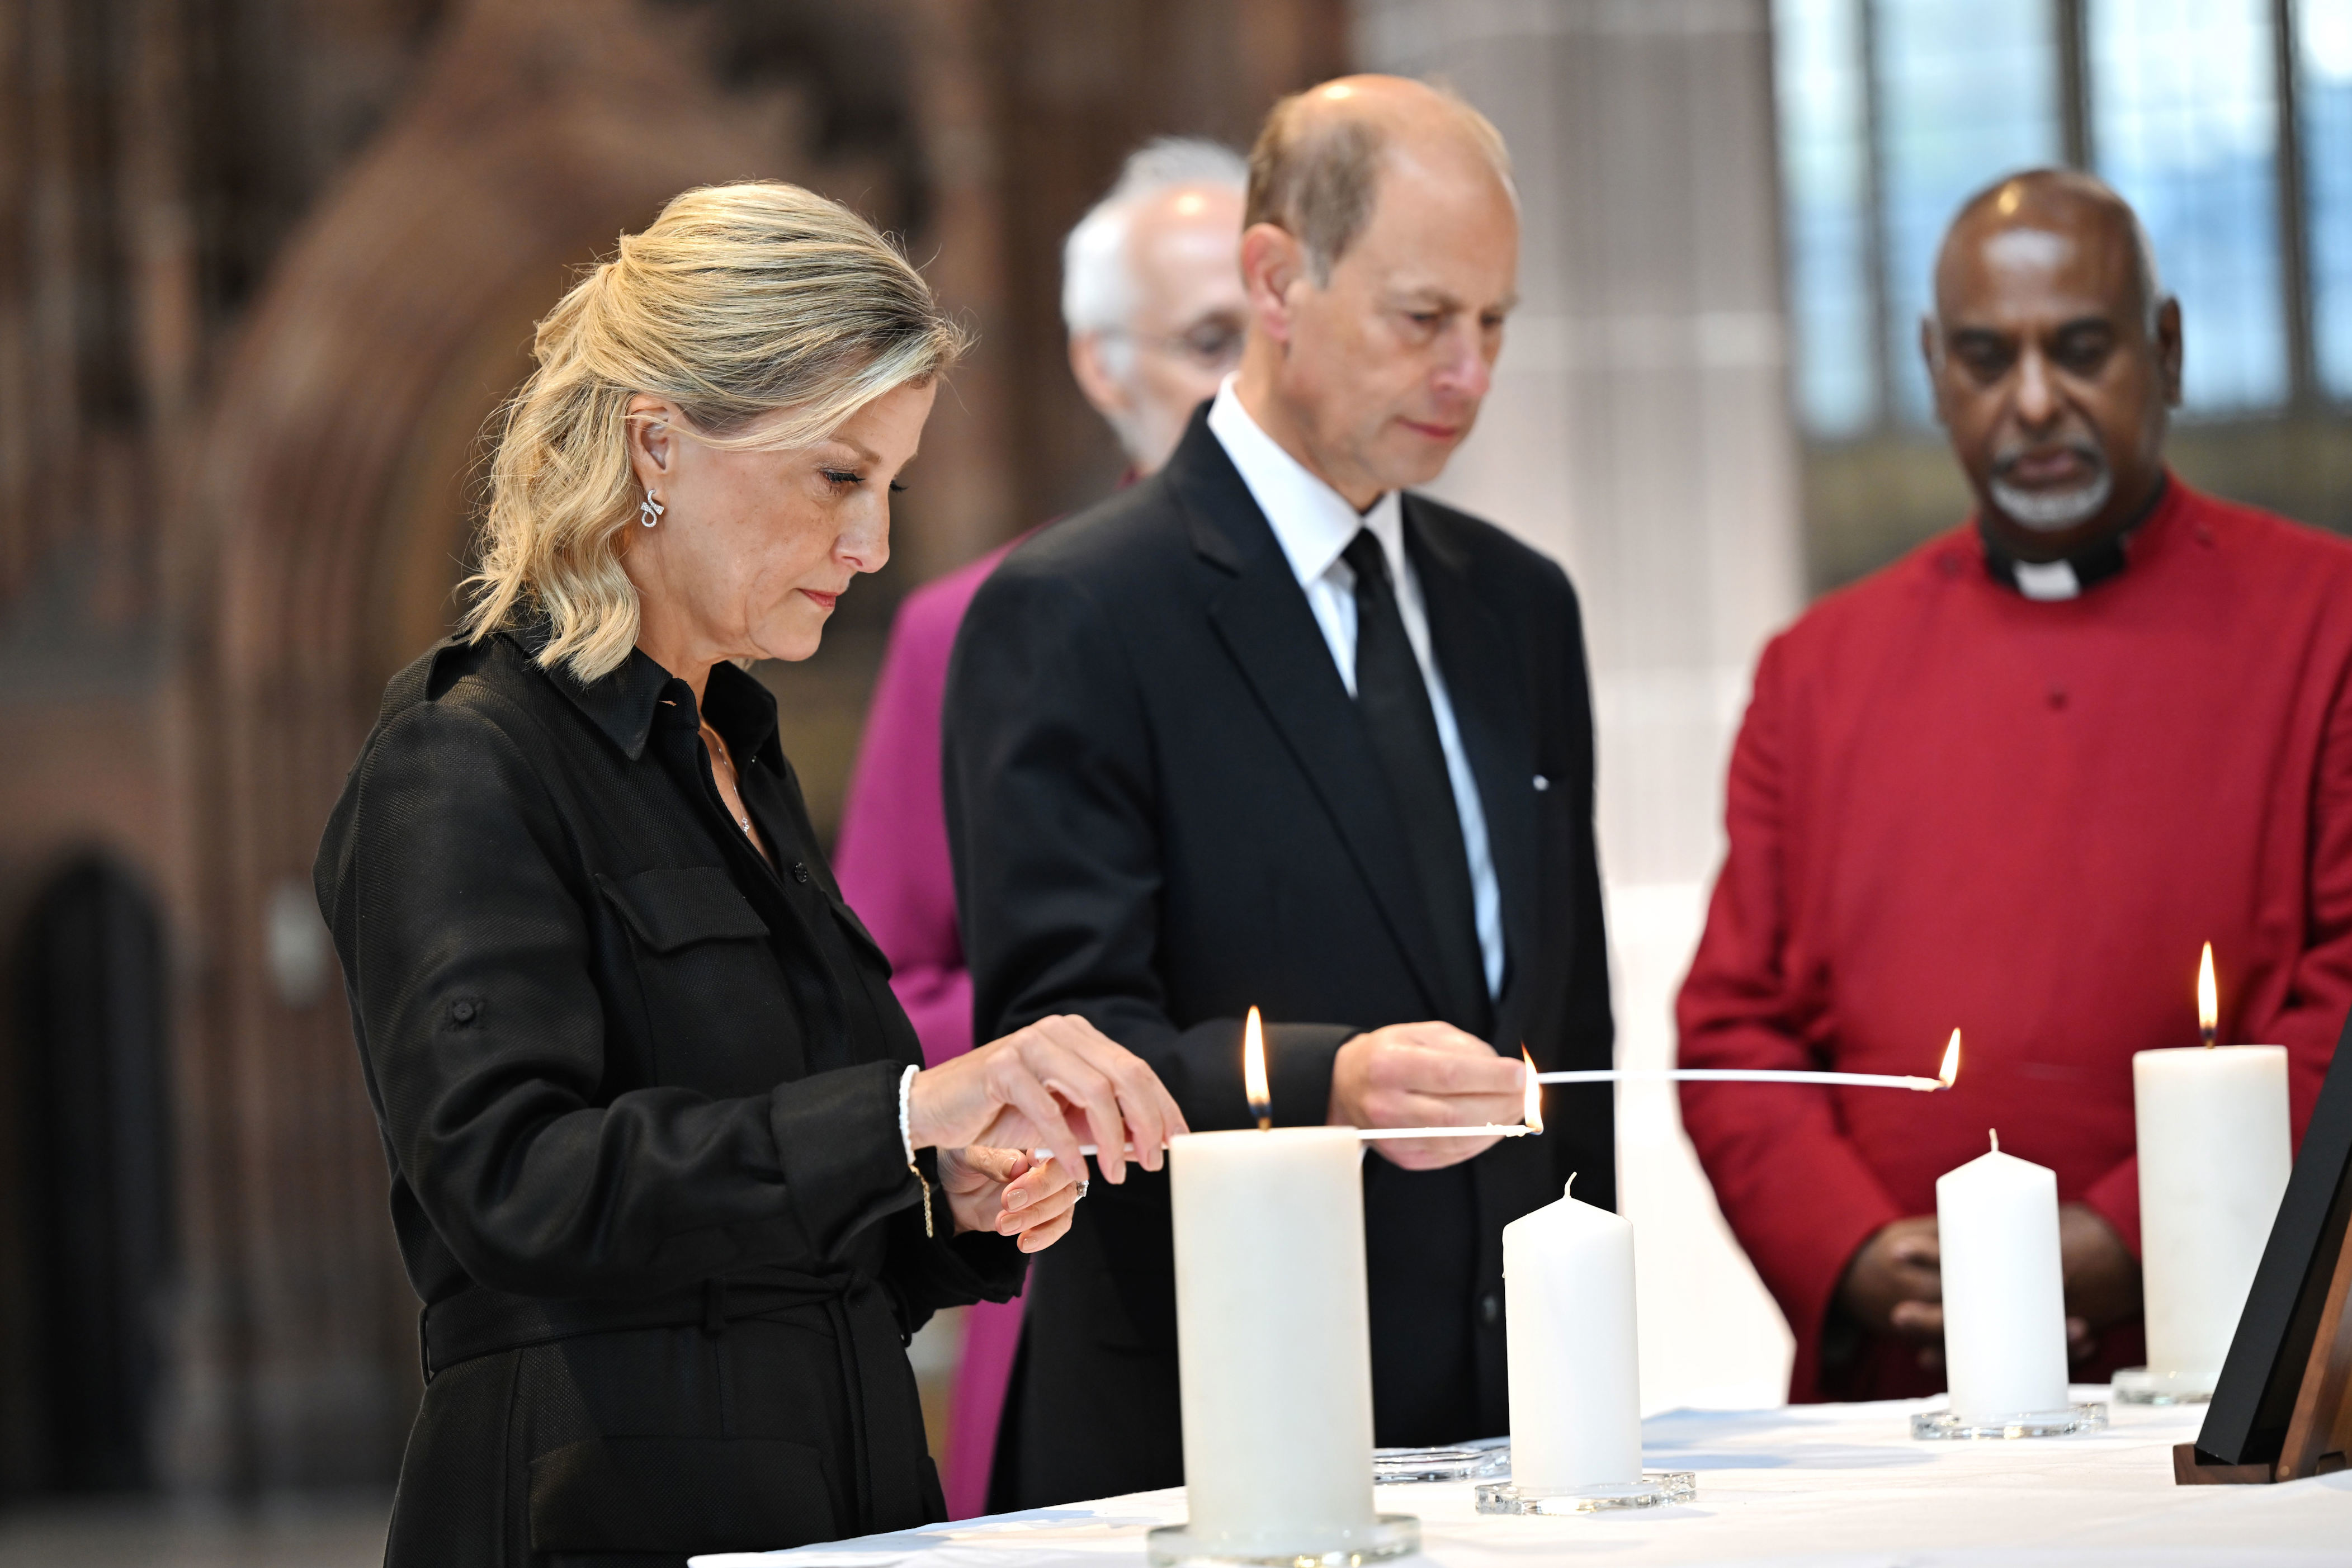 <p>Sophie, Countess of Wessex and husband Prince Edward visited Manchester Cathedral in Manchester, England, on Sept. 15, 2022, to light a candle in memory of Queen Elizabeth III during a day in the city to accept condolences on behalf of the royal family ahead of the late monarch's funeral. They and other senior royals stepped in to support King Charles III as he retreated to his Highgrove estate to spend a day in quiet reflection after a packed schedule of events following Elizabeth's death on Sept. 8.</p>